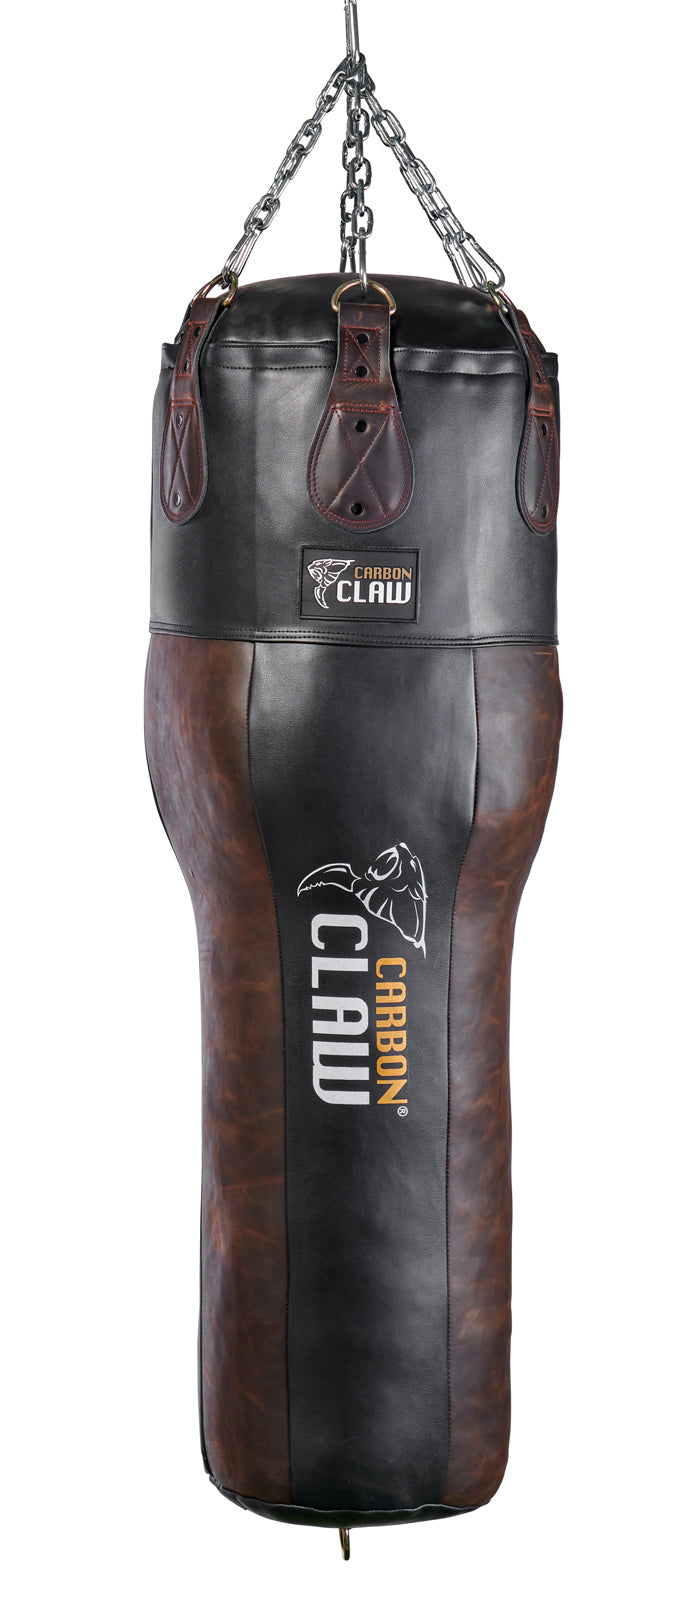 Carbon Claw Recoil Series RB-7 4ft Uppercut Angle Bag